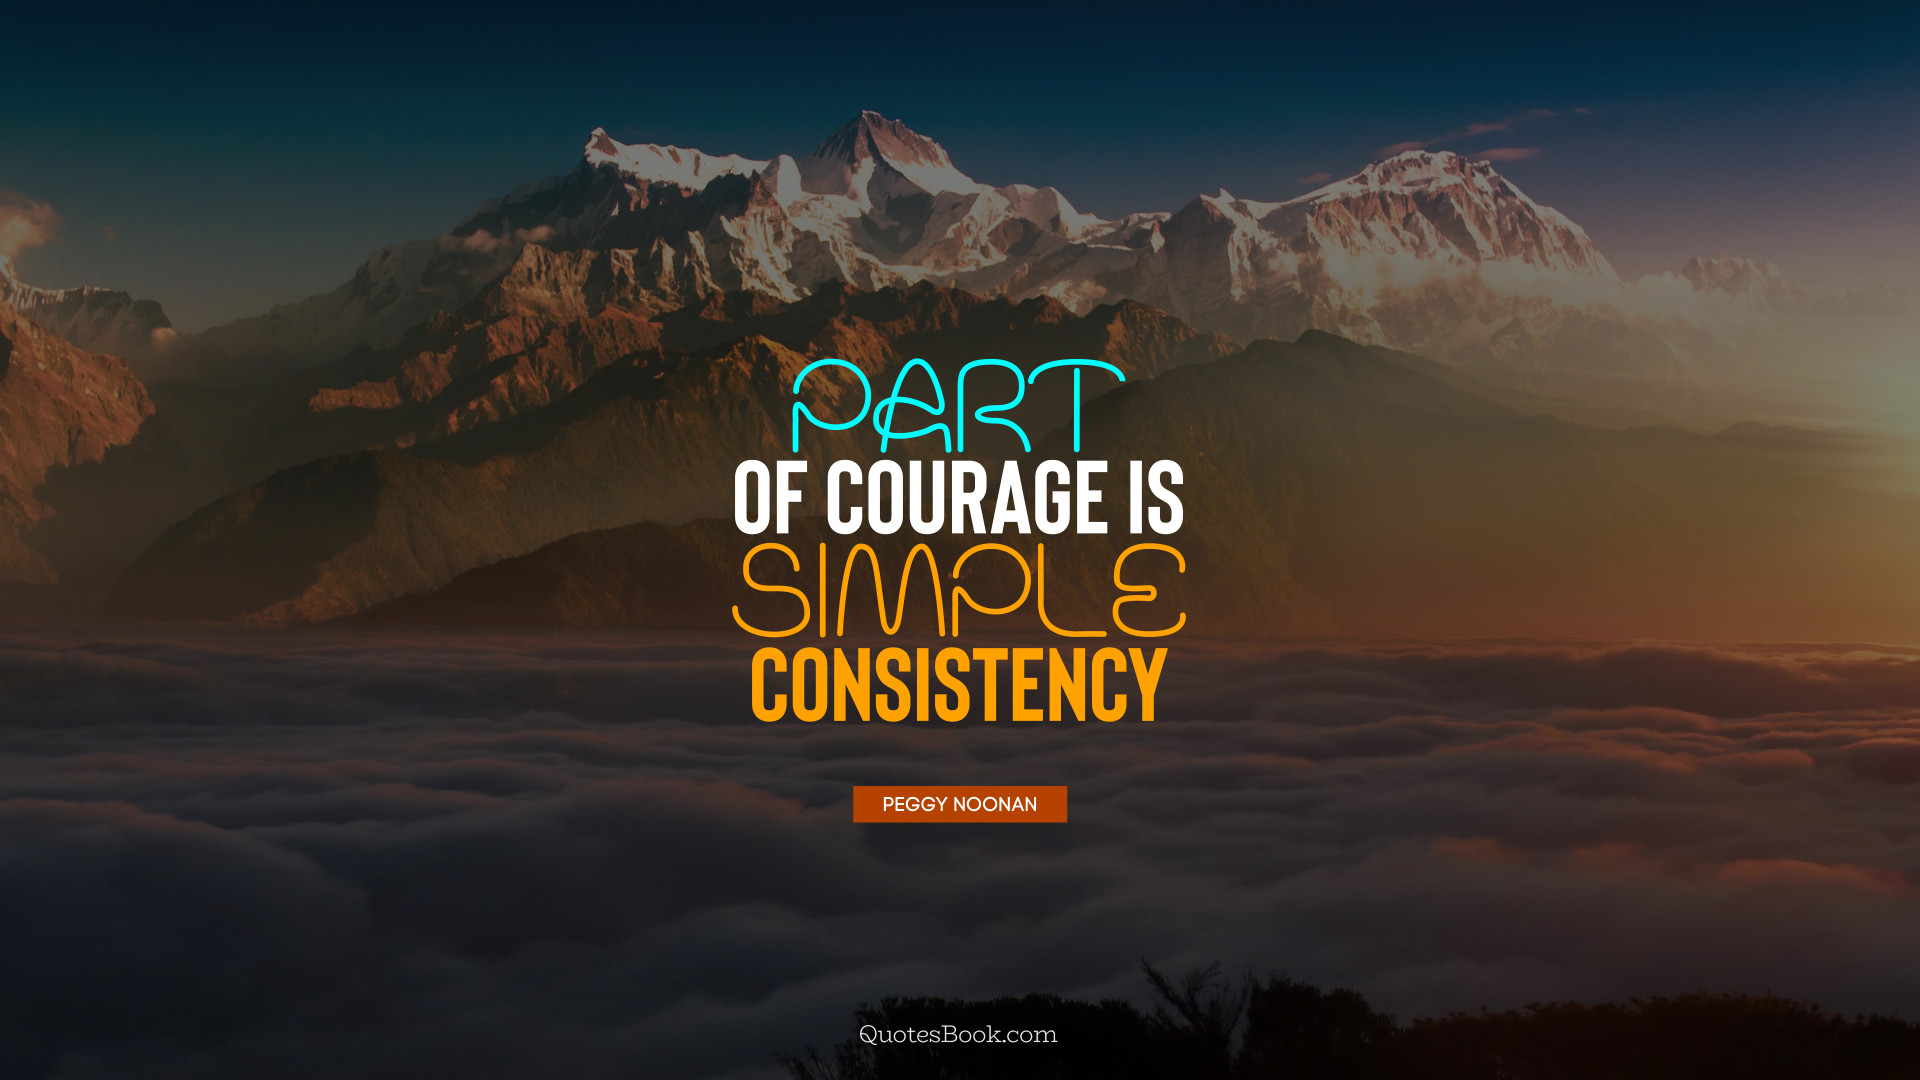 Part of courage is simple consistency. - Quote by Peggy Noonan - QuotesBook